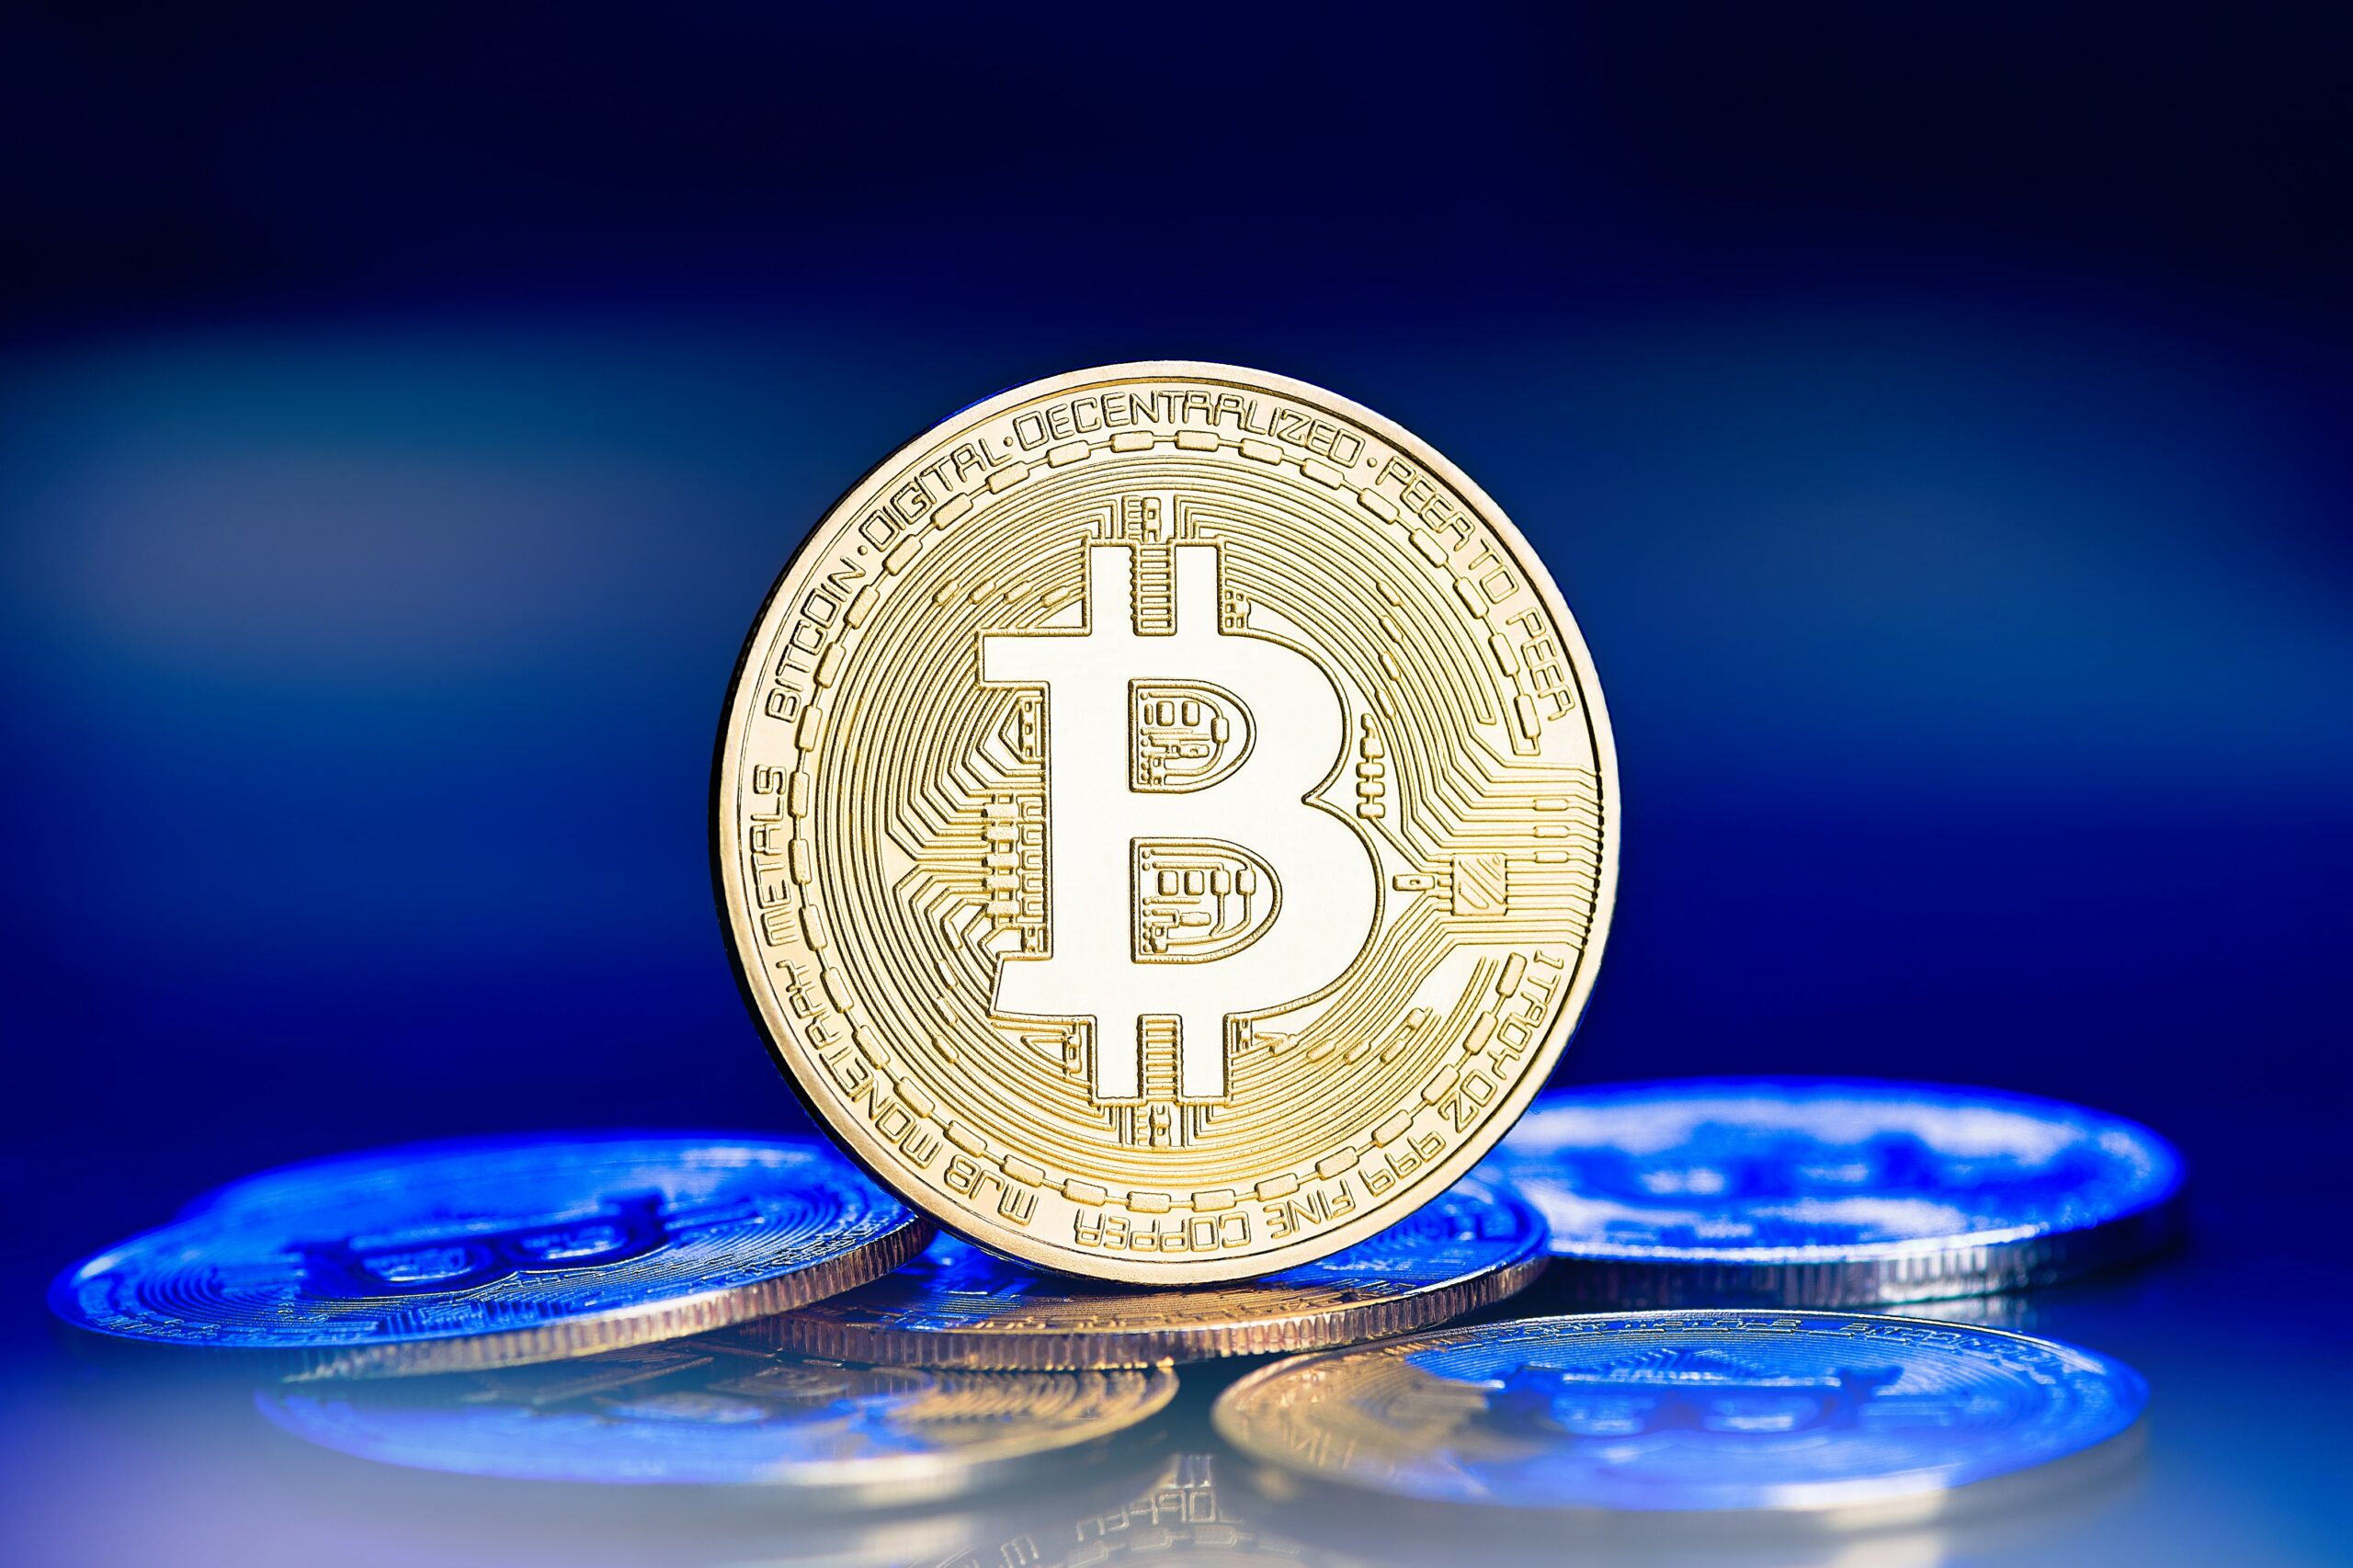 Recent technical analysis suggests Bitcoin (BTC) is on track to reach a new all-time high above $80,000 if it maintains its current rally. Insights from Stockmoney Lizards, shared in a tweet on July 26, outline a roadmap for Bitcoin’s price movement, predicting rapid growth once certain conditions are met. According to the analyst, Bitcoin successfully … Continue reading 